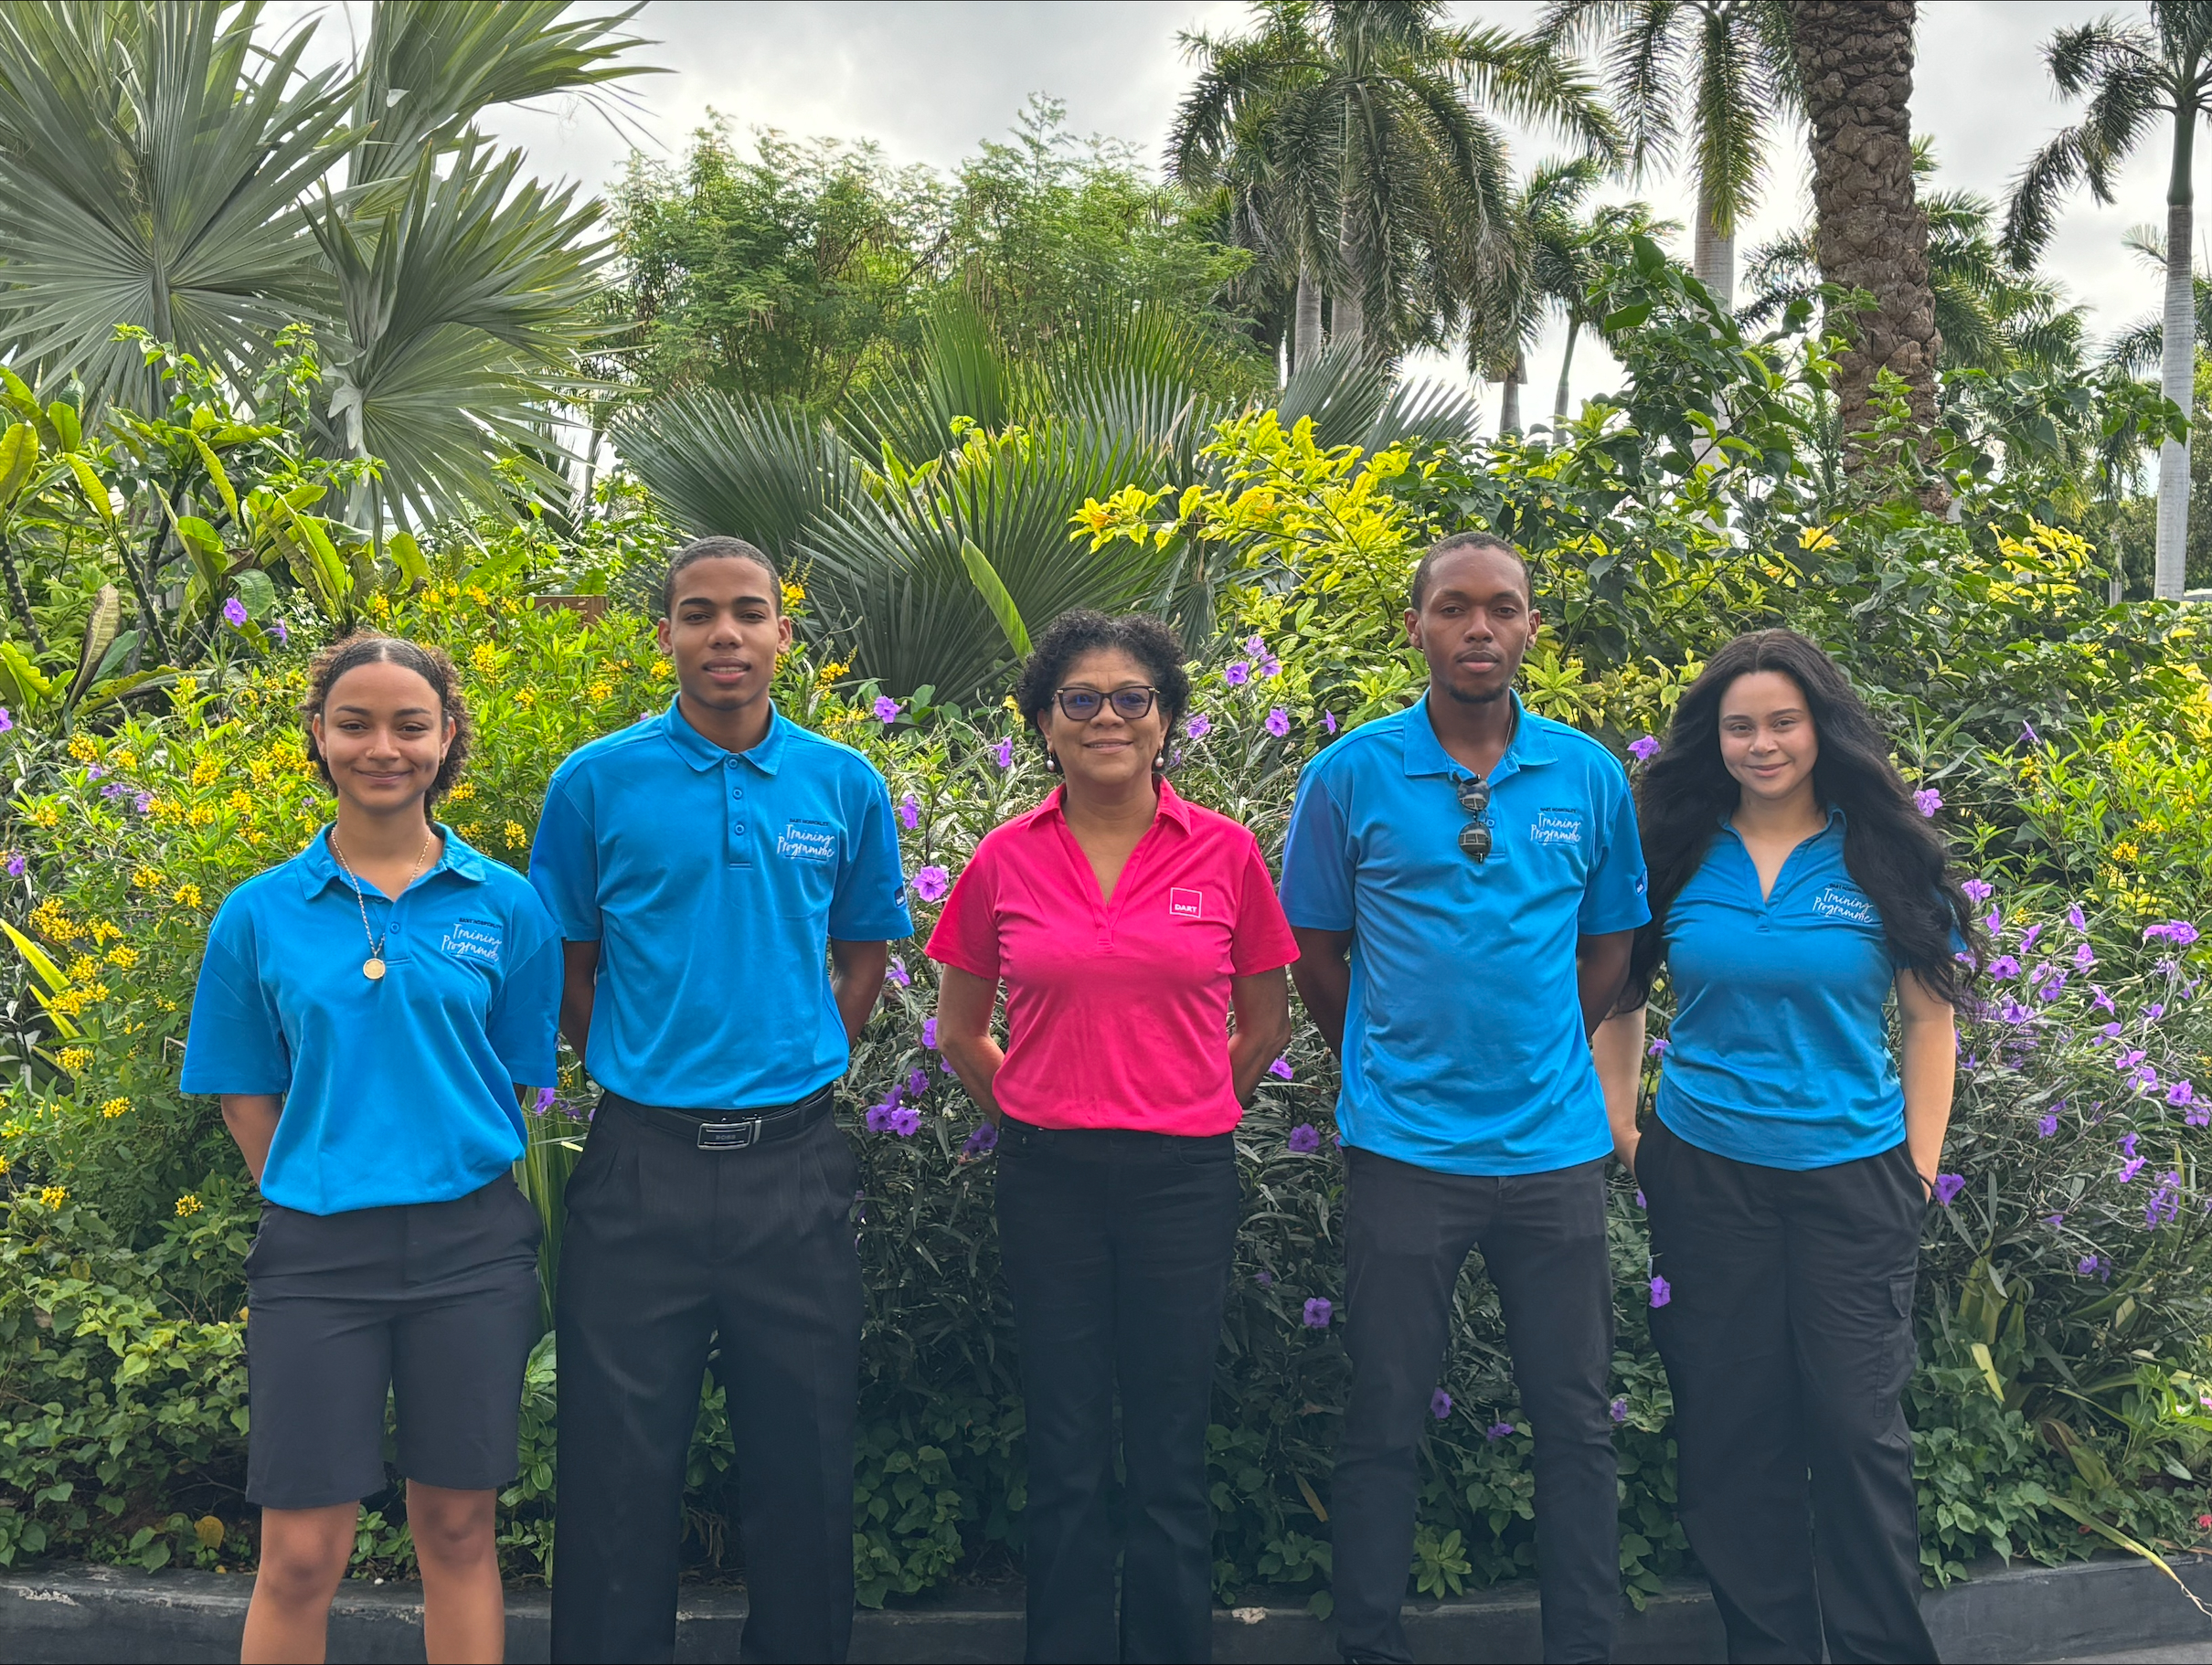 Anguillan experience a boost for young Caymanian hospitality workers